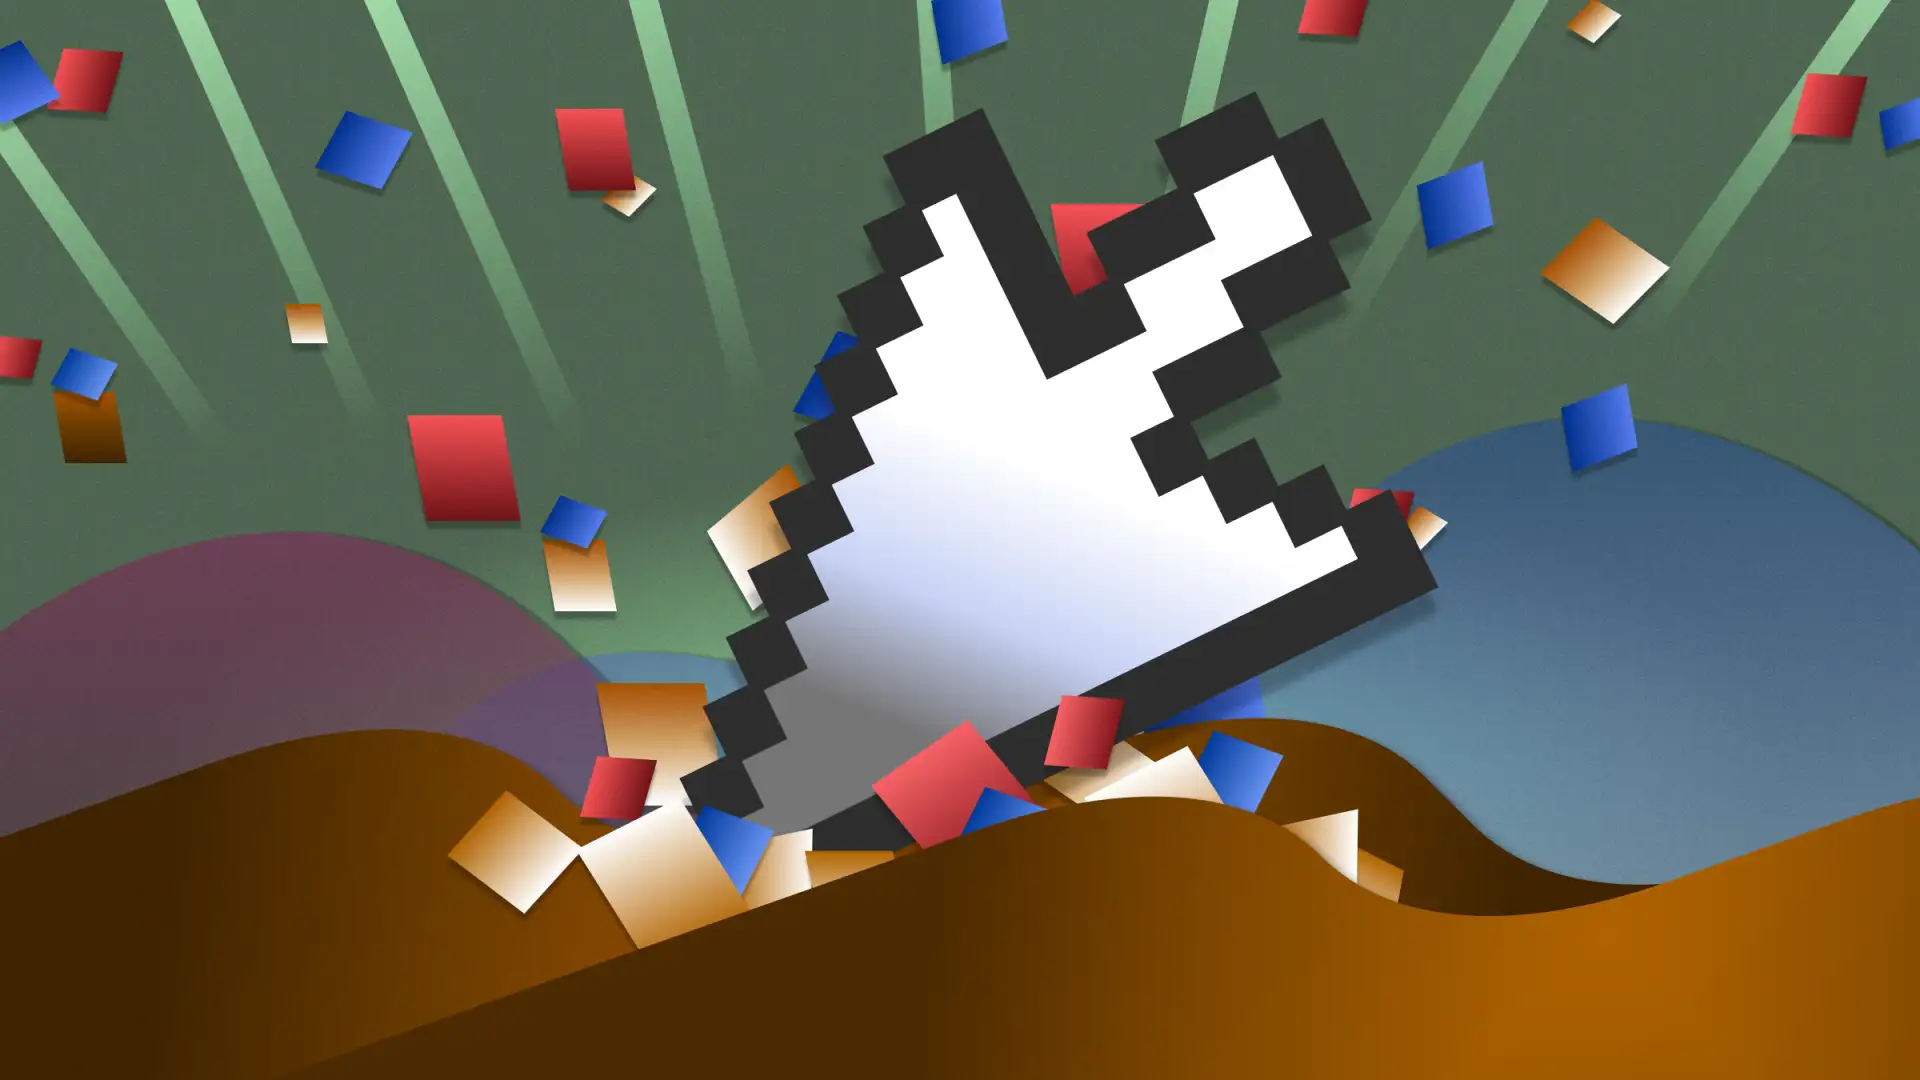 A large pixelated cursor crashes into hills, and numerous pixels contort and explode into the sky.